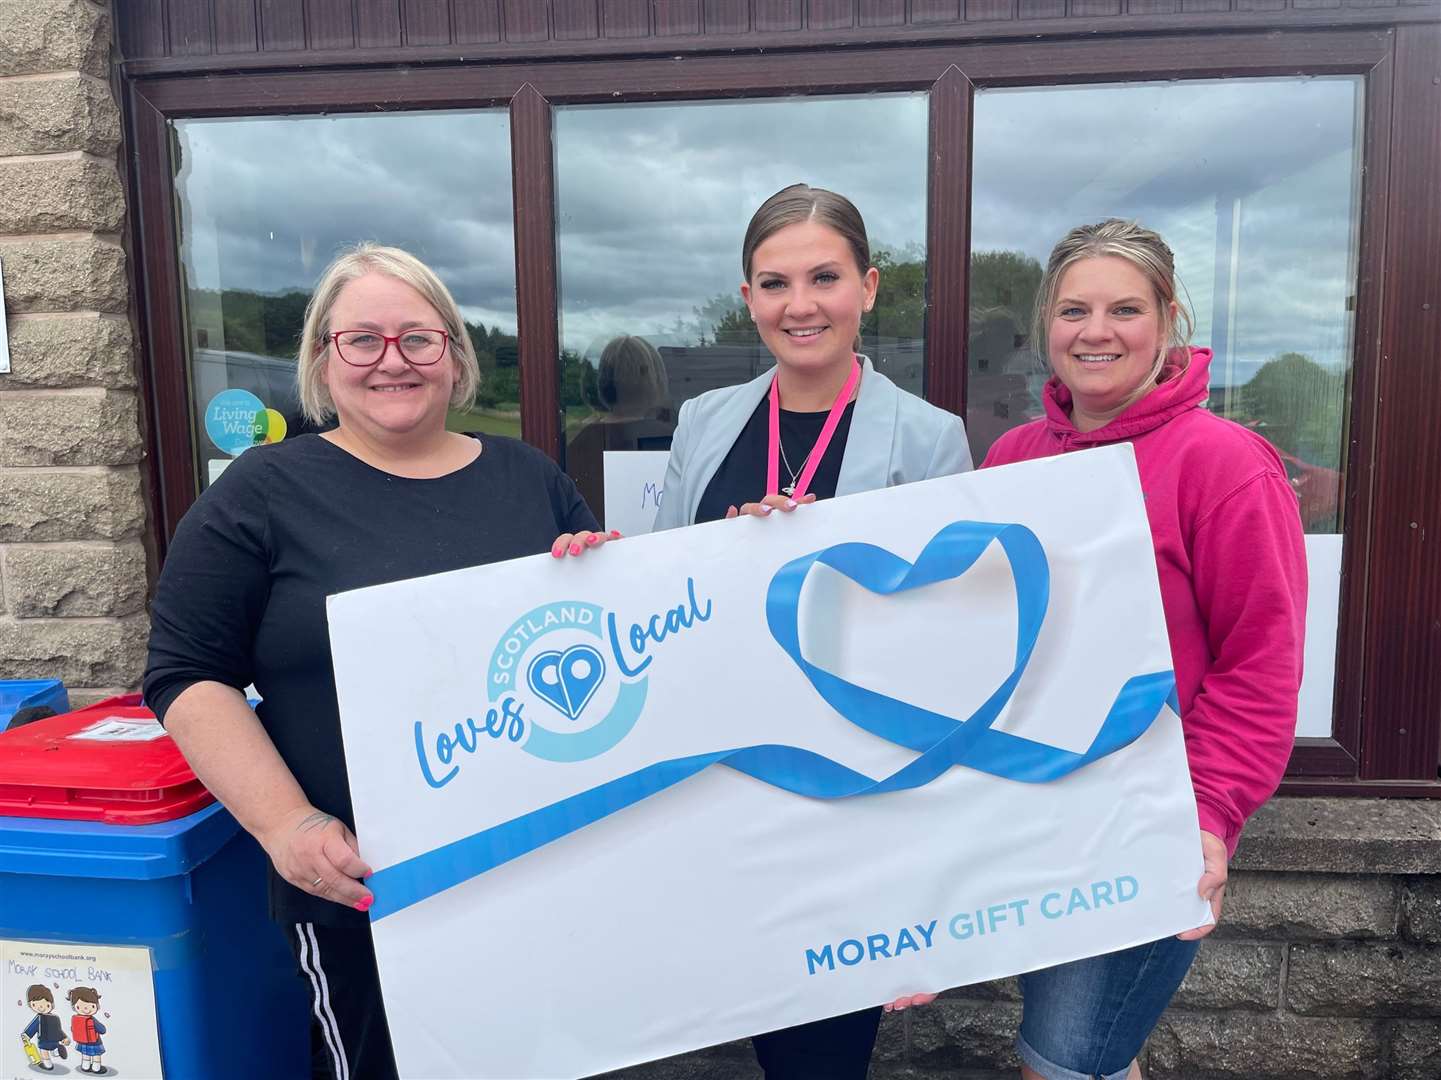 (From left) Moray School Bank Development Manage Debi Weir, Moray Council Development Project Officer Kirsty Shand and Moyra Younie, Volunteer Co-ordinator at Moray School Bank.